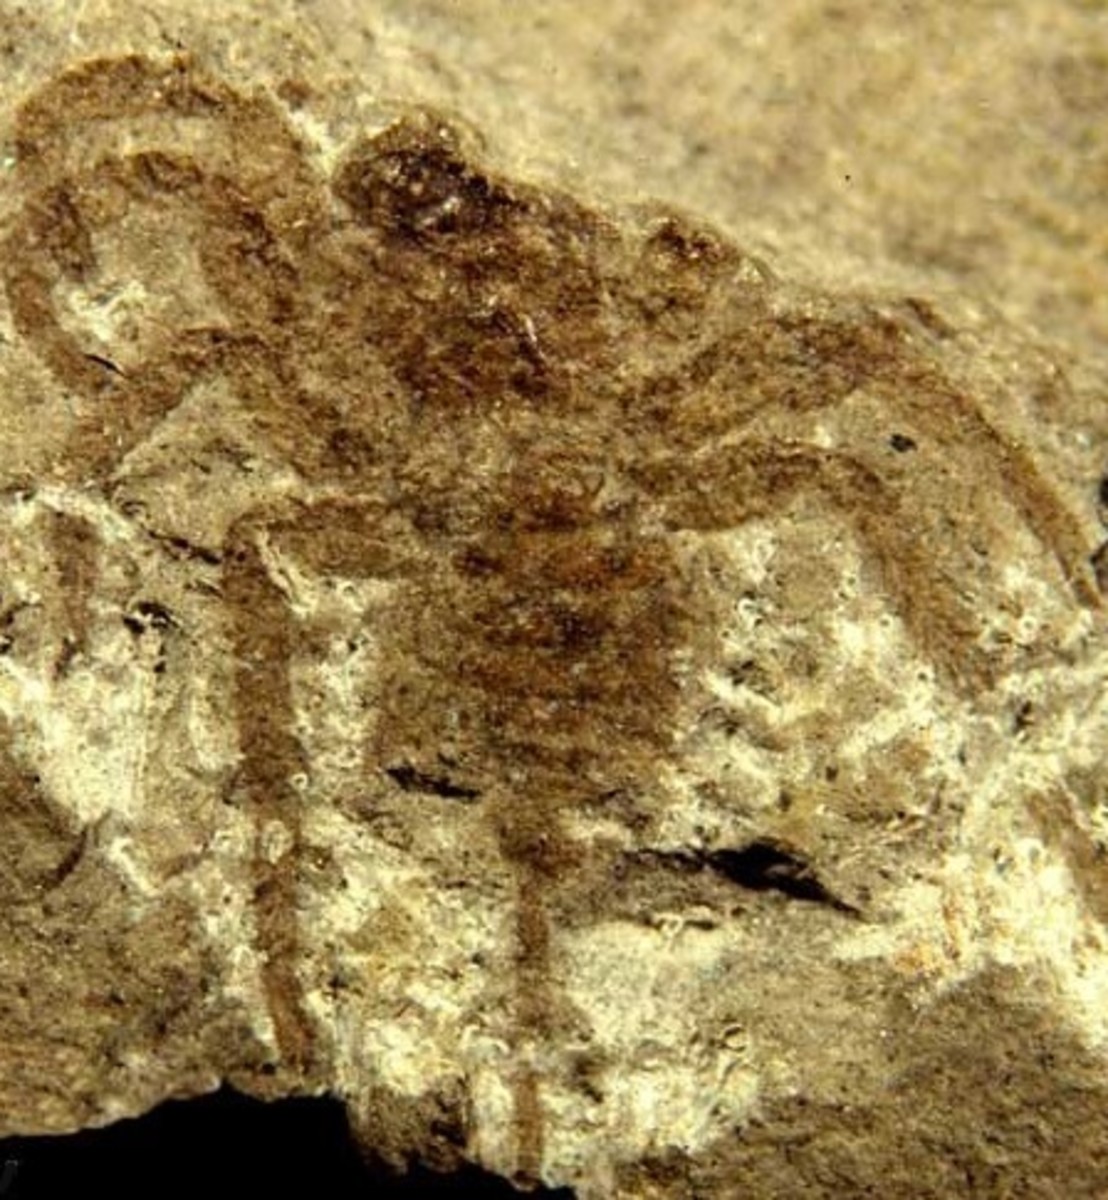 An Attercopus fossil showing a tail (bottom).